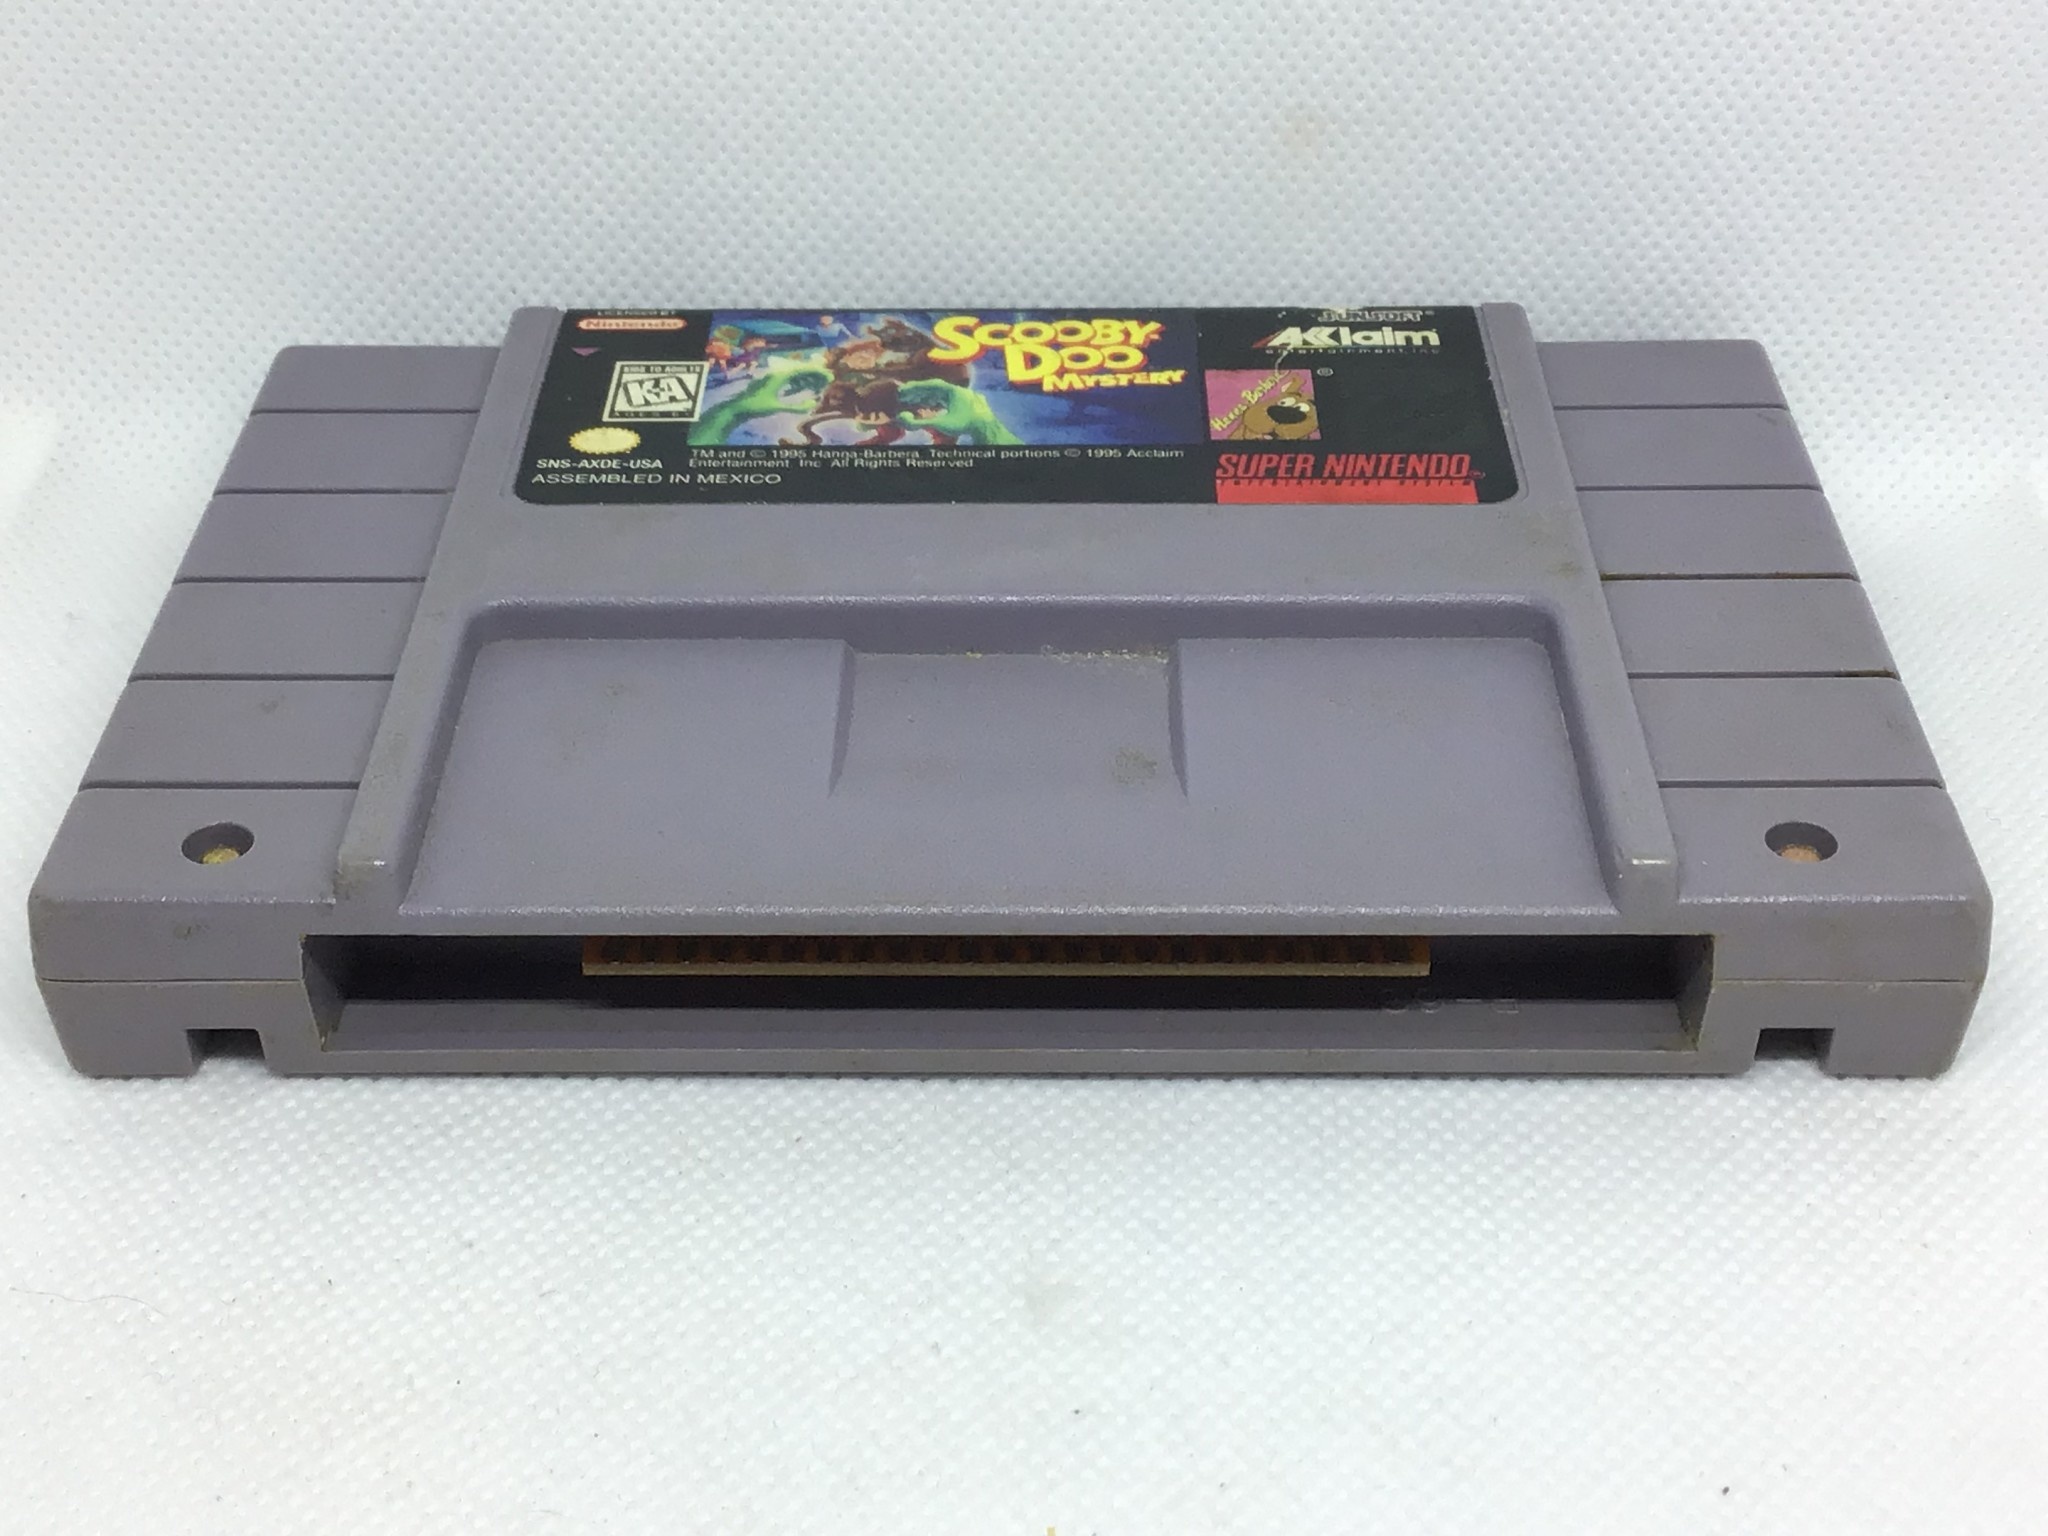 scooby-doo-mystery-snes-cape-fear-games